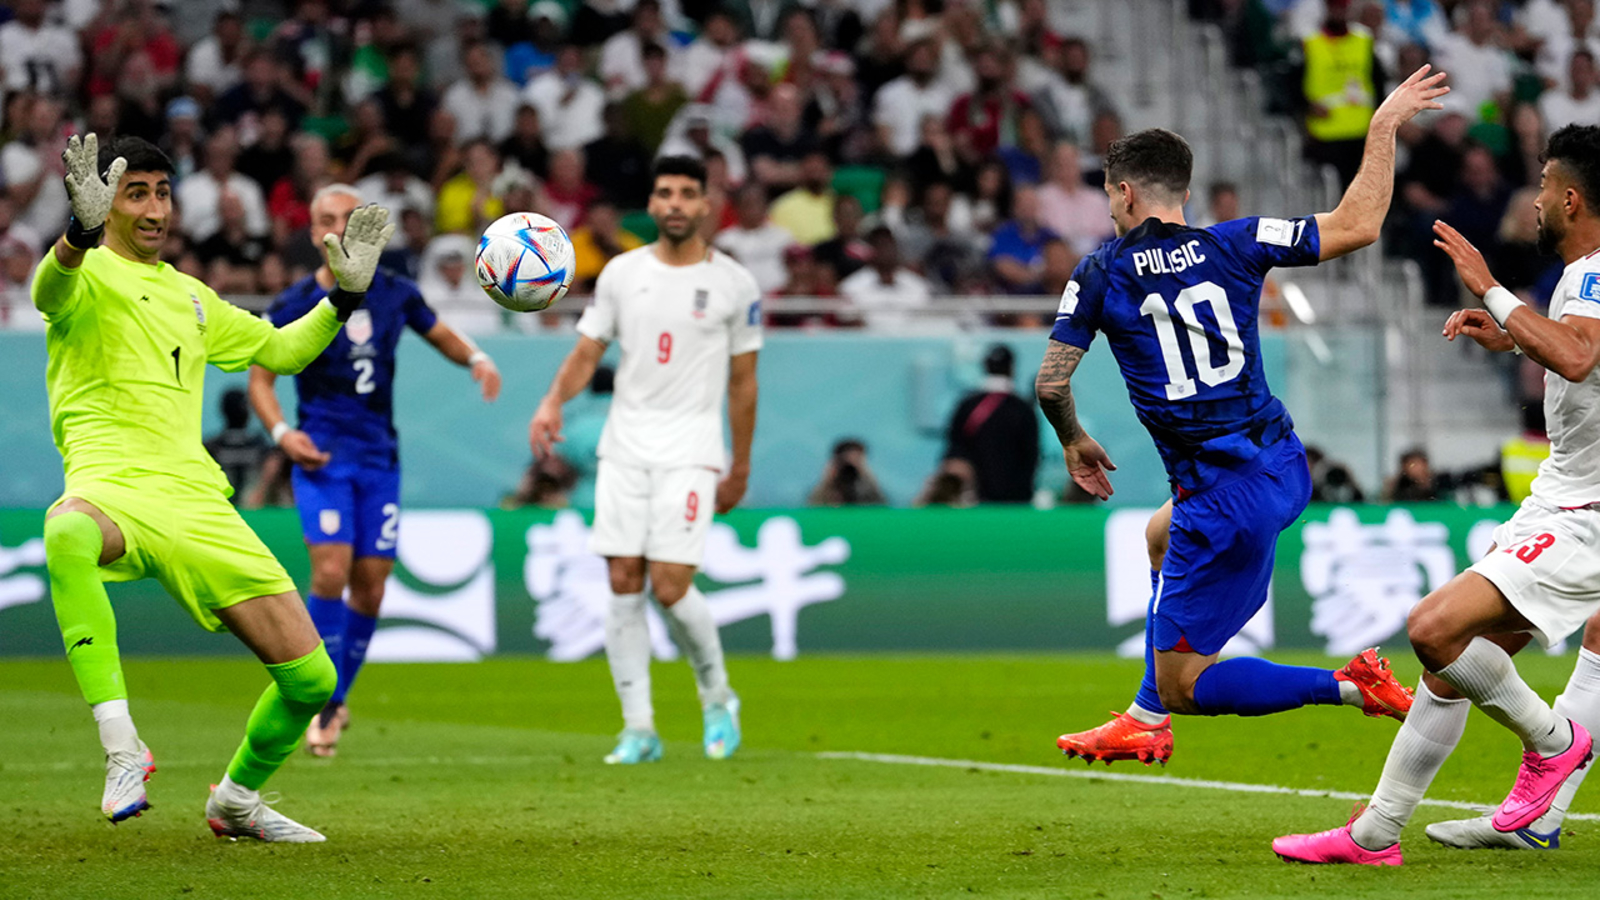 The USA beat Iran to book their ticket to the knockouts with a lone goal from Chelsea's Christian Pulisic, capturing their second qualification in a row